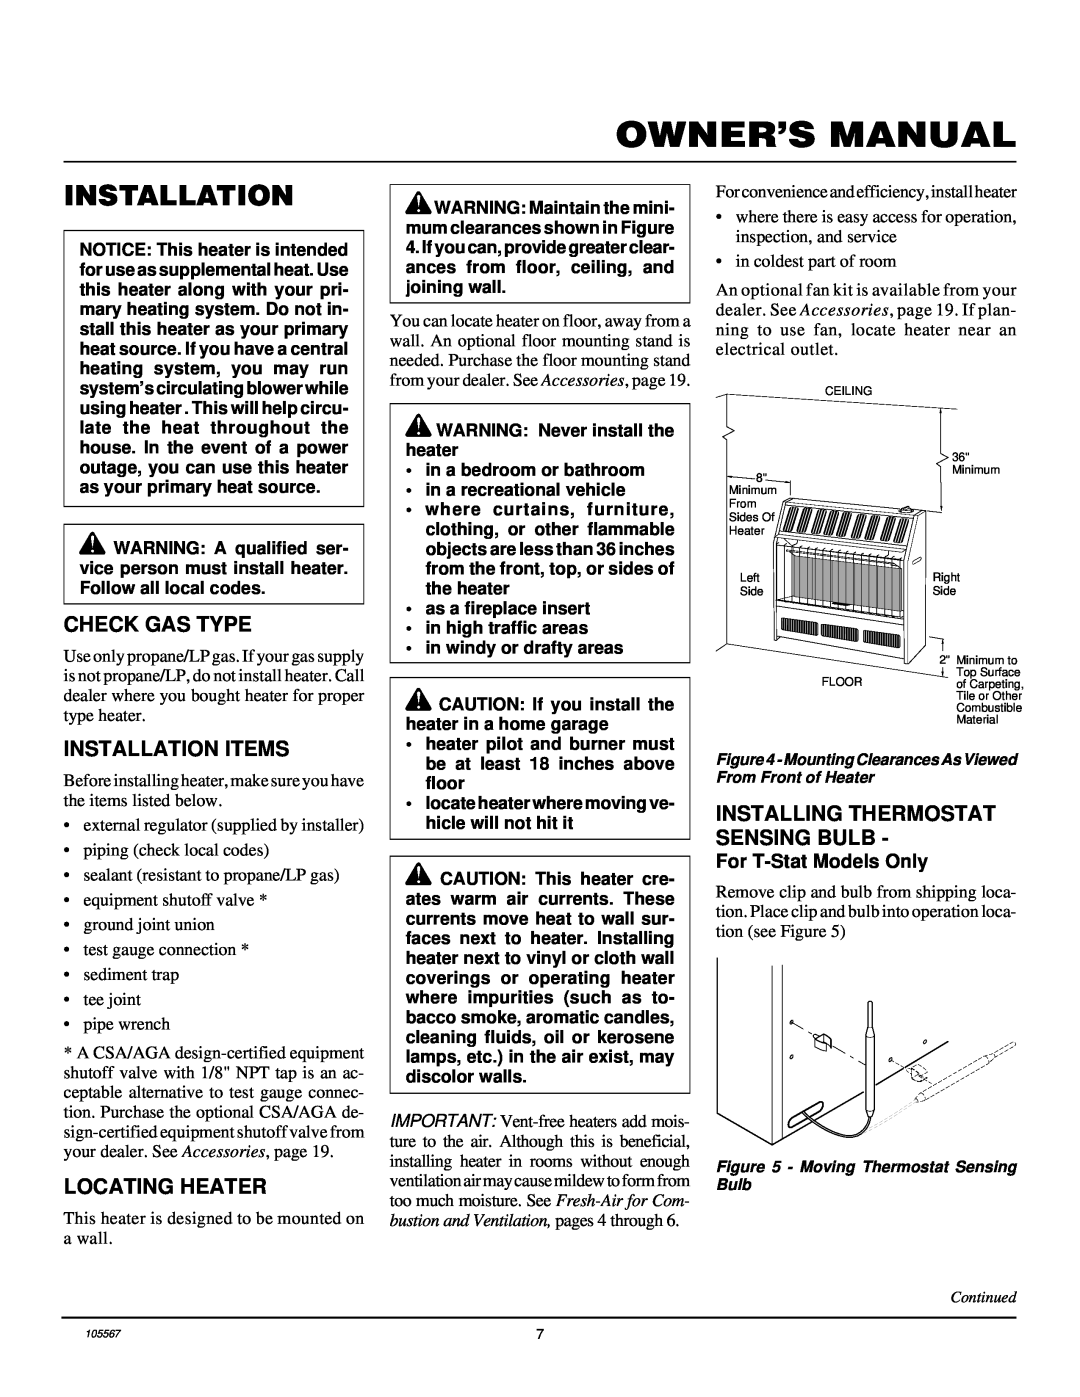 Desa FB-3B Check Gas Type, Installation Items, Locating Heater, Installing Thermostat Sensing Bulb, Owner’S Manual 